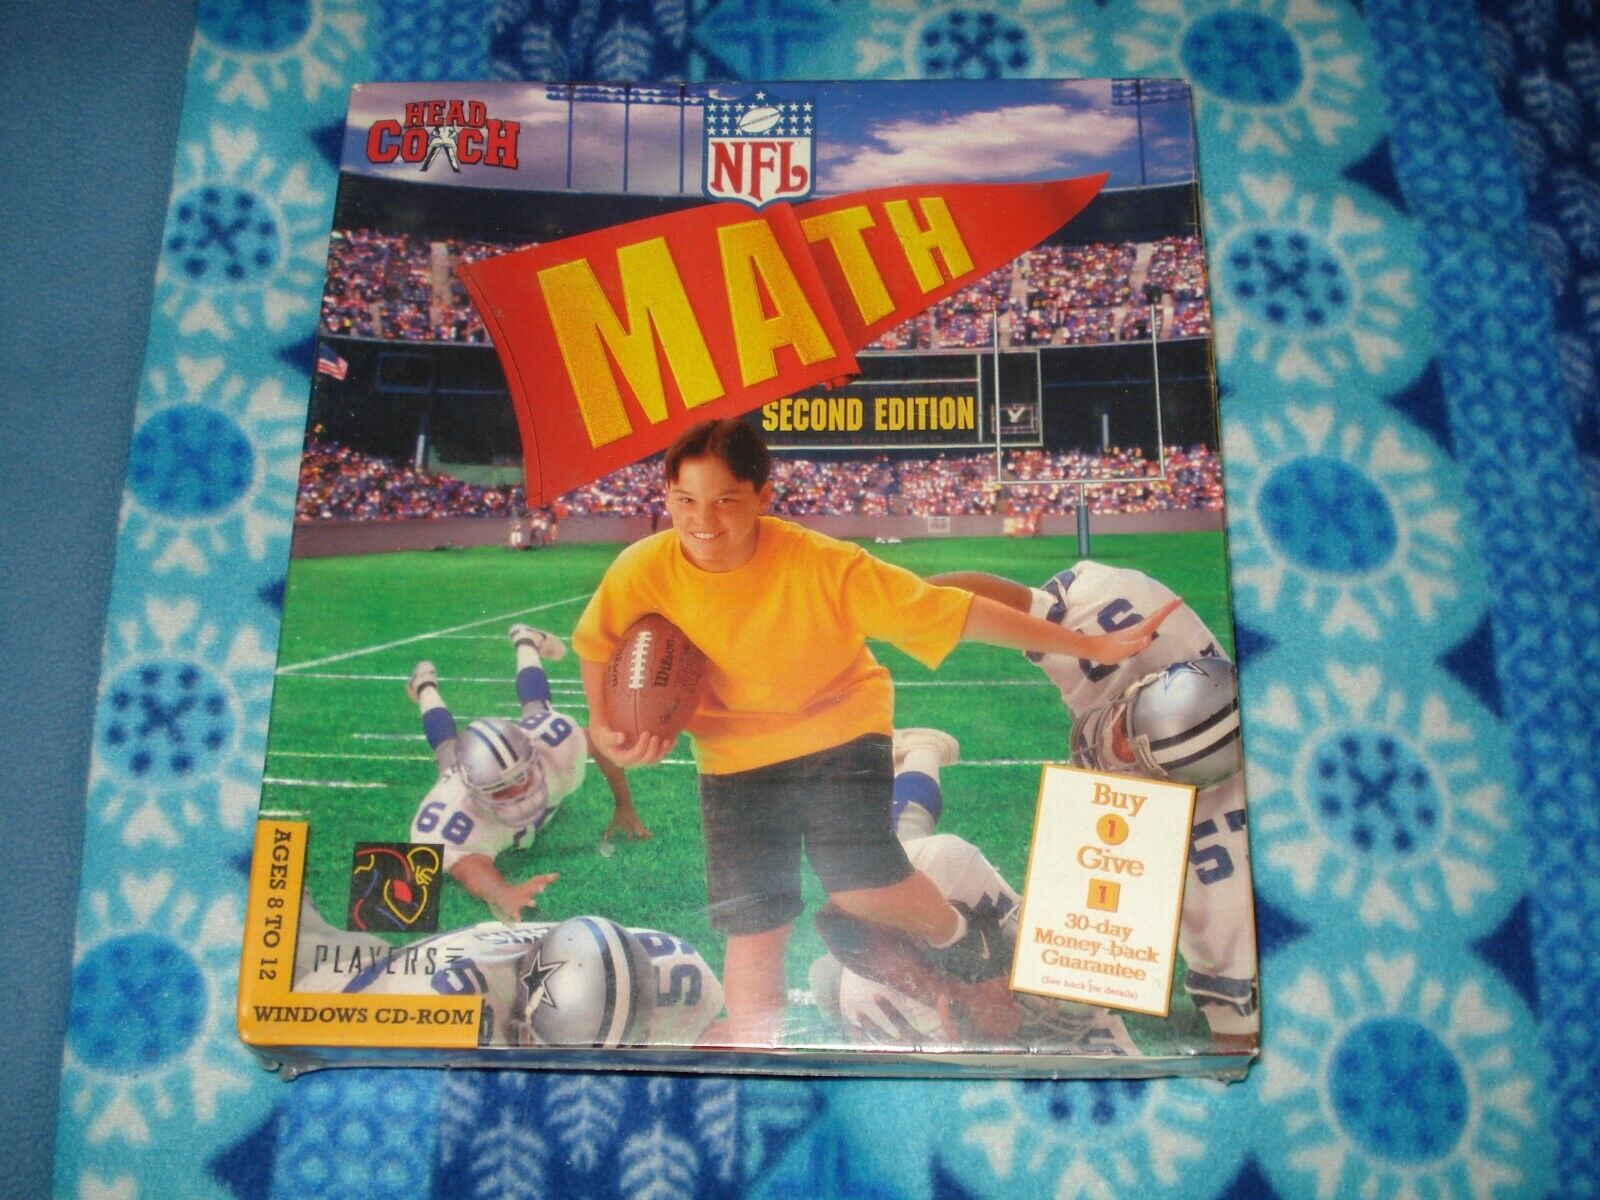 NFL Math - w/ NFL Math Super Bowl Ring (1996, CD-ROM) Ages 8 to 12 - Sealed New